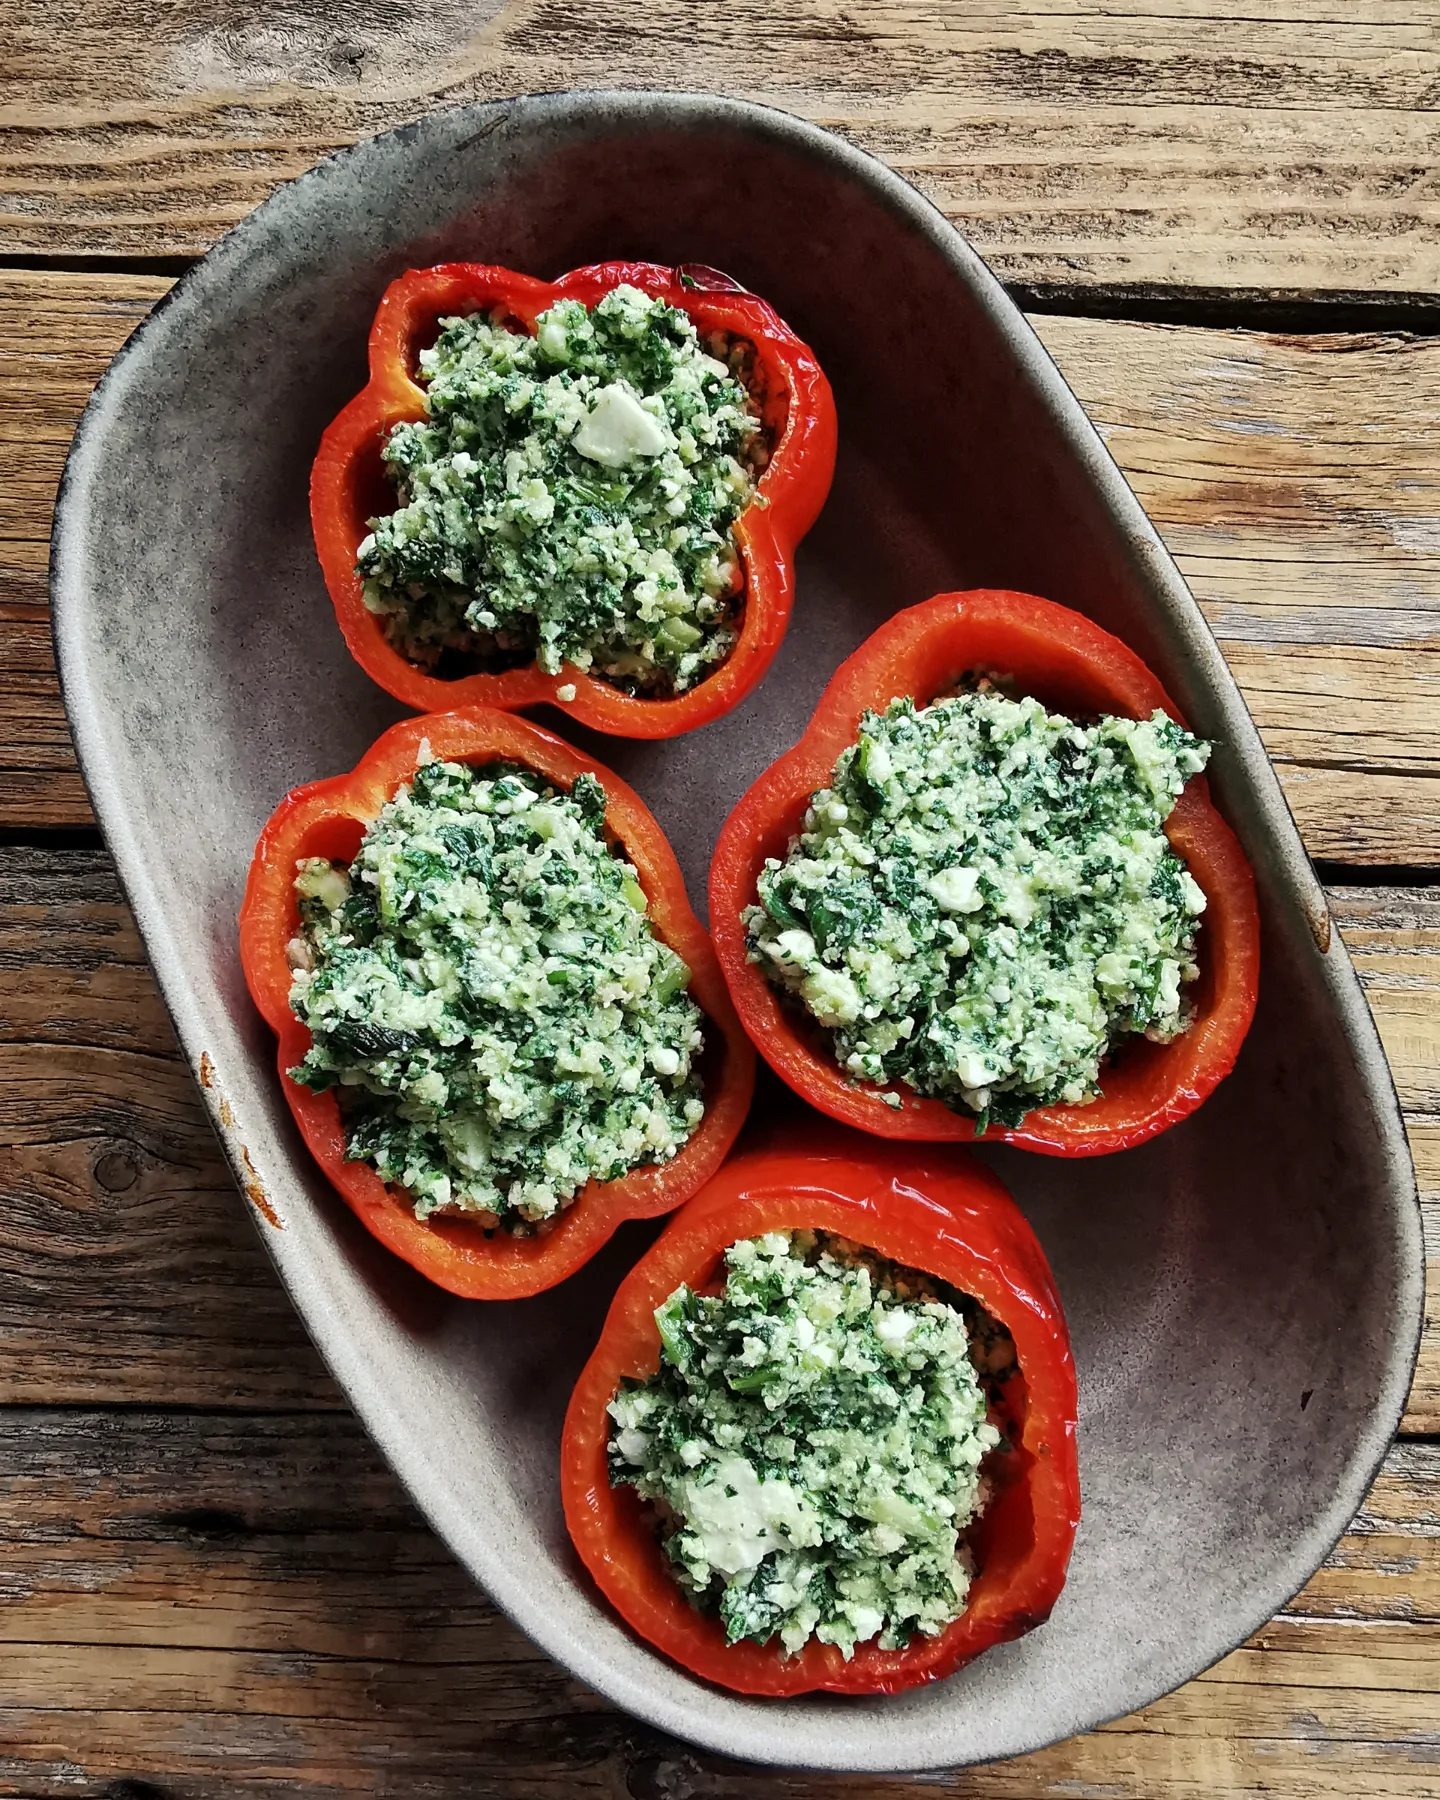 Spinach and feta stuffed peppers